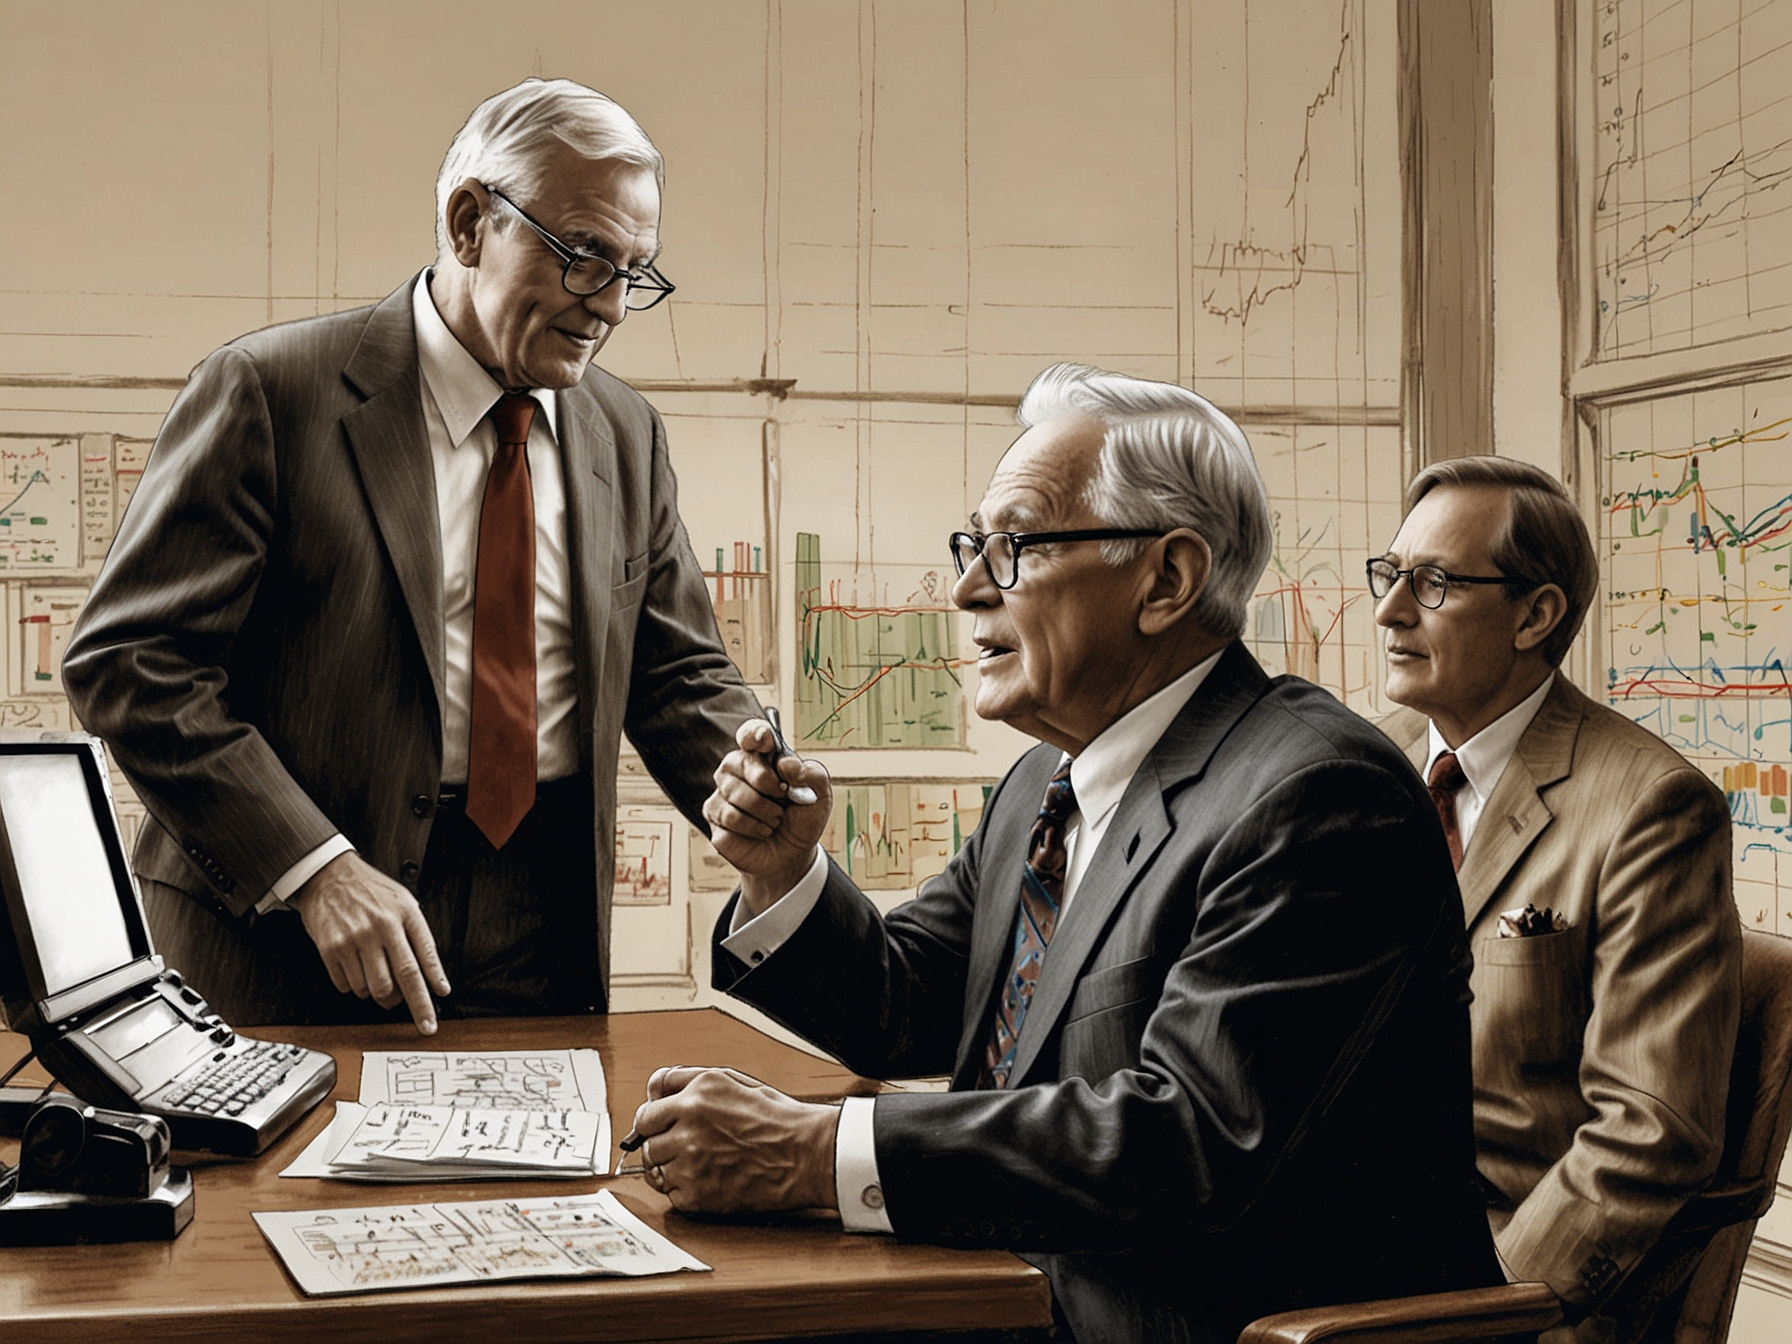 An illustration of a financial advisor explaining the potential of small-cap stocks within the Russell 2000 Index to older and younger generations, highlighting the concept of long-term investment.